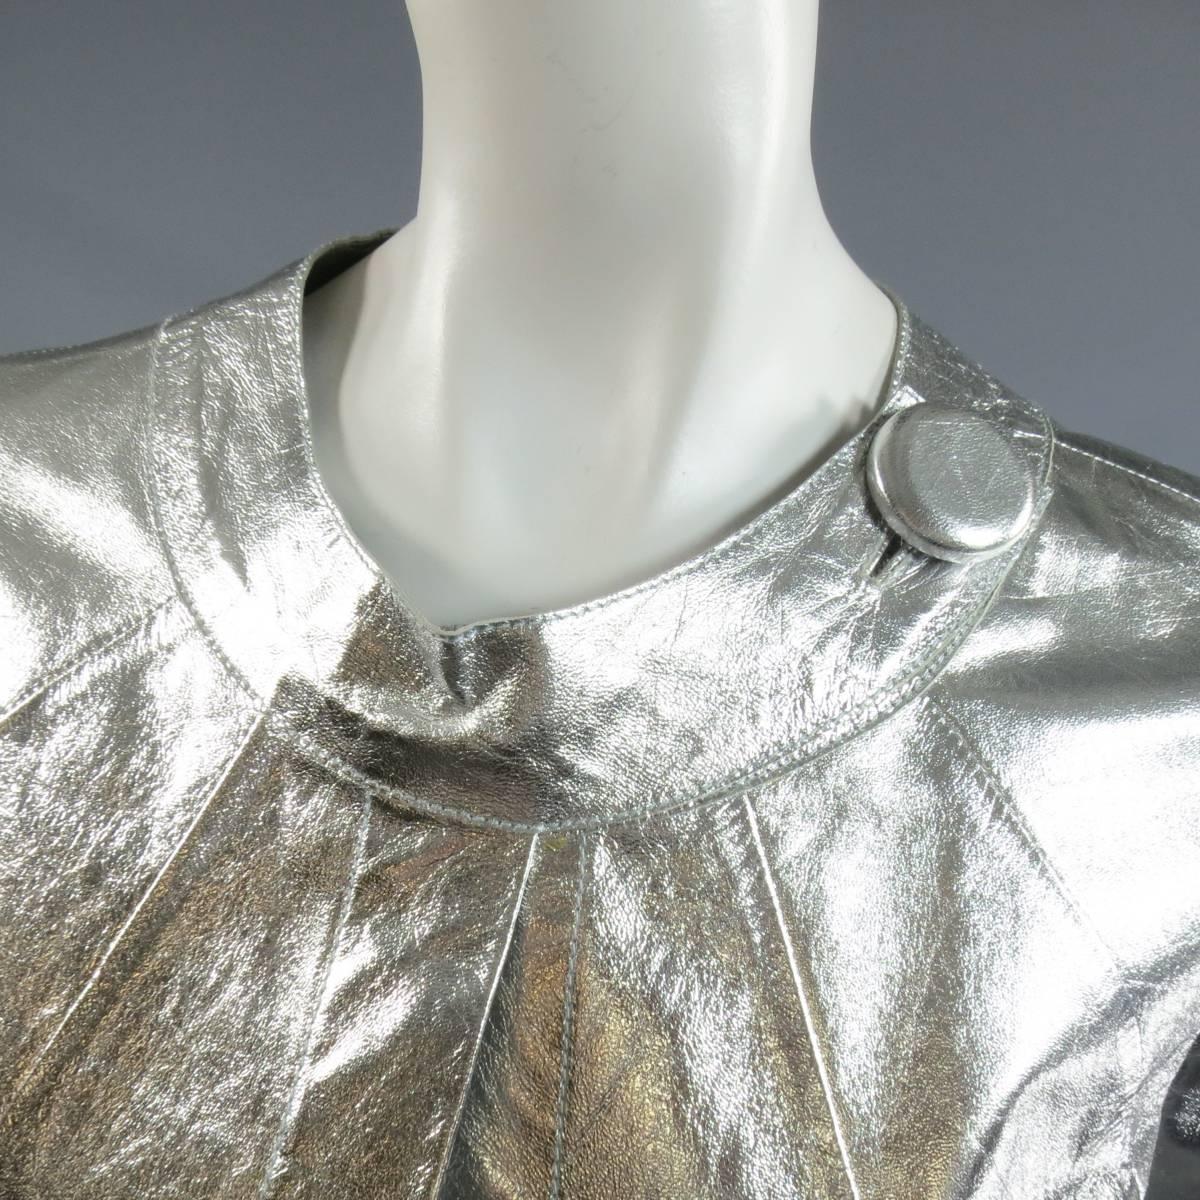 This fabulous 1960's inspired Glen Arthur for CHESTER jacket comes in a light weight metallic silver leather and features a round neckline with single covered button closure, A-line silhouette, open front, back pleat, and gorgeous laser cut floral